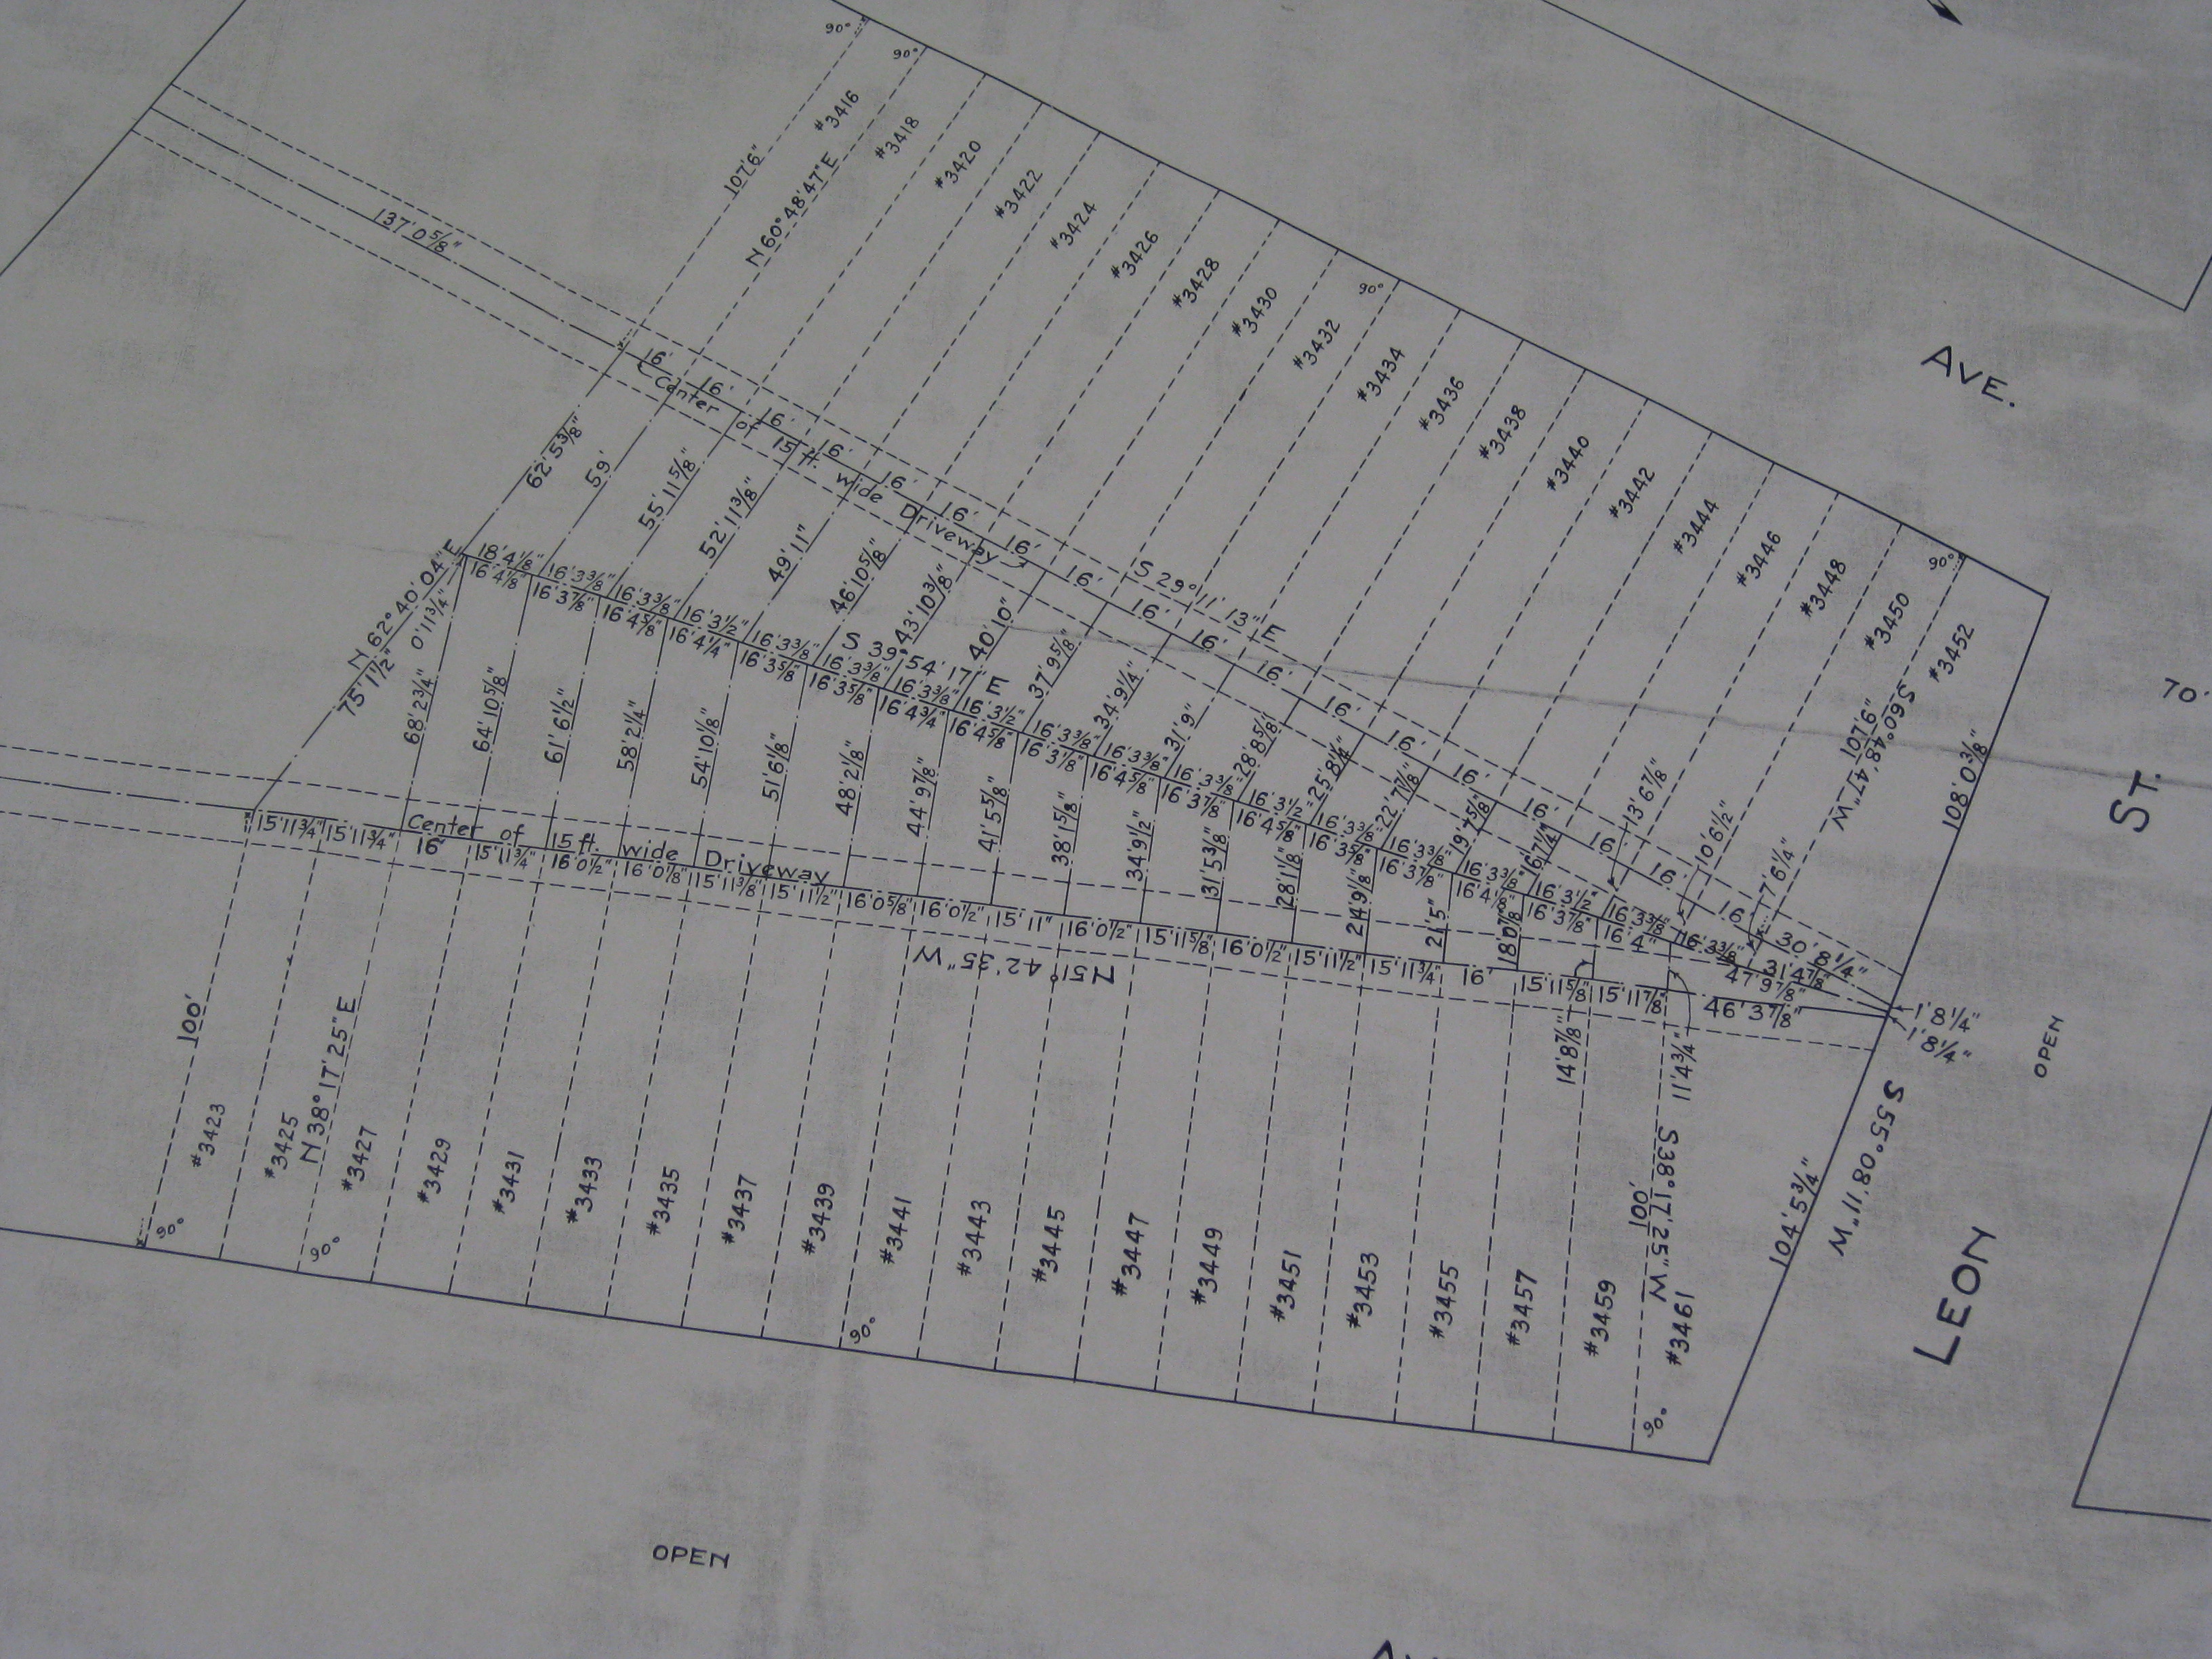 A detailed plan of the lots to be resold to residents who share the common driveway.